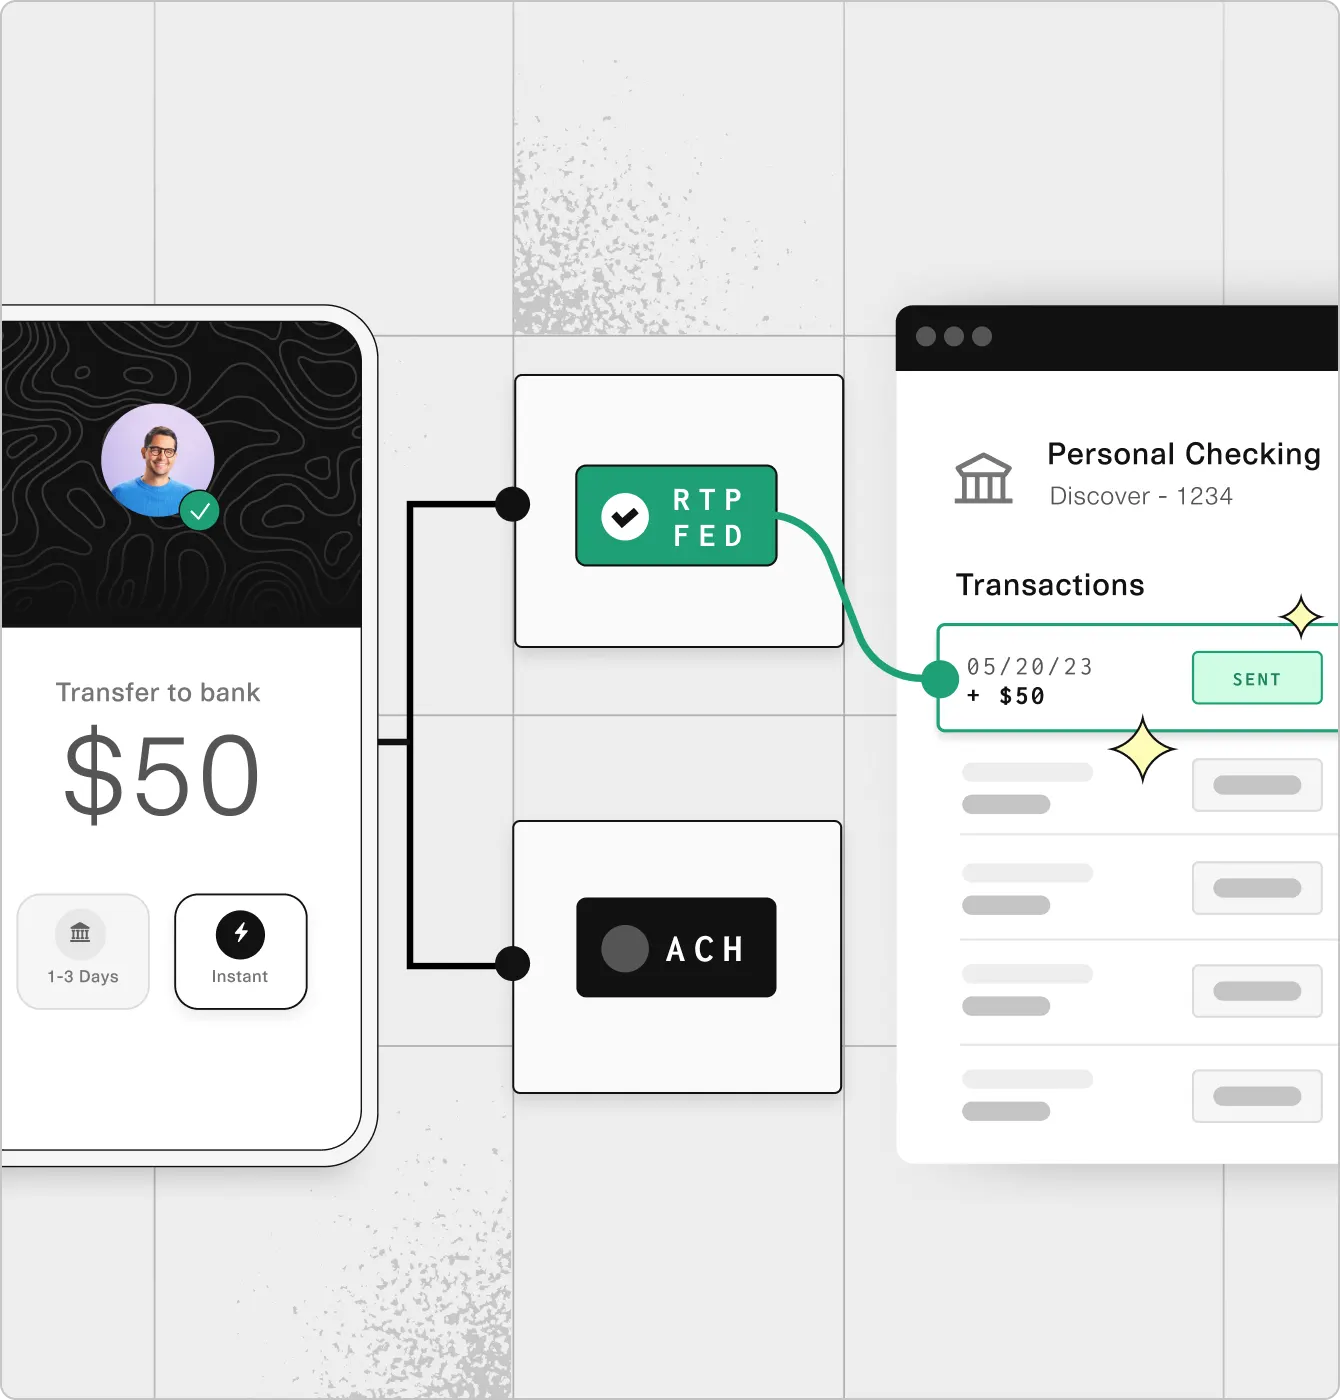 A mobile phone connected to a personal checking bank account through ACH, real-time payments, or FedNow